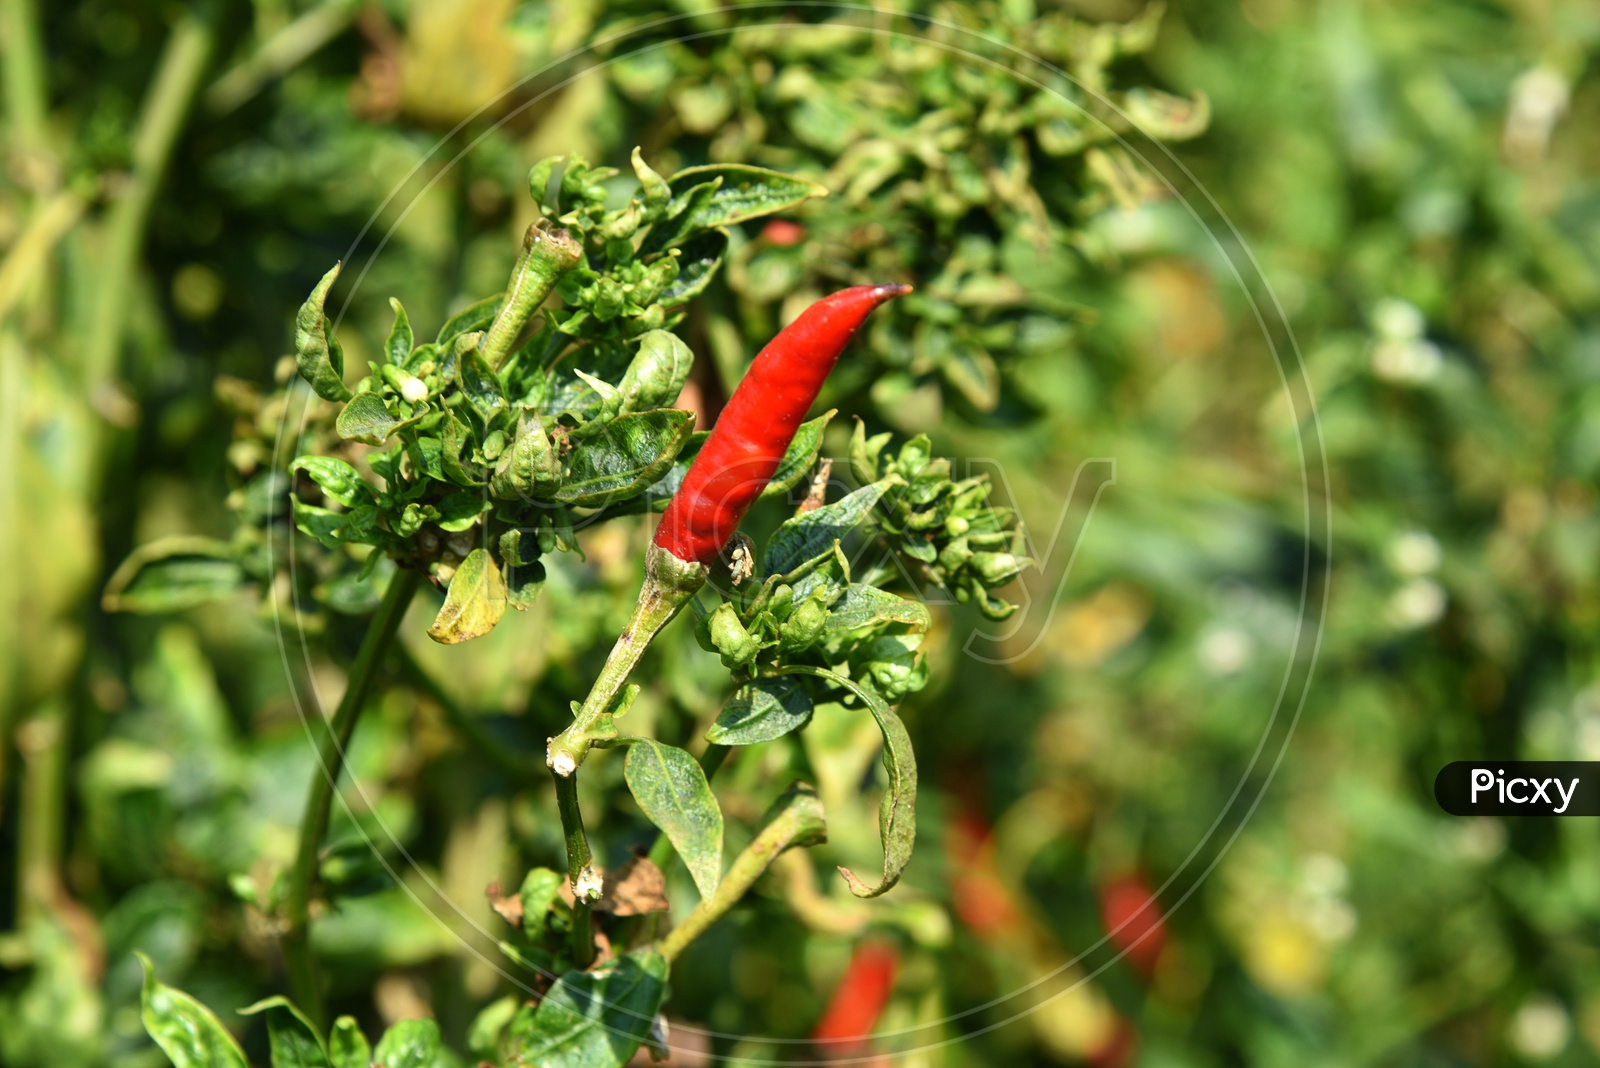 Green Organic Chili Pepper Growing on Plants In an Organic Farm Or Agricultural Farm